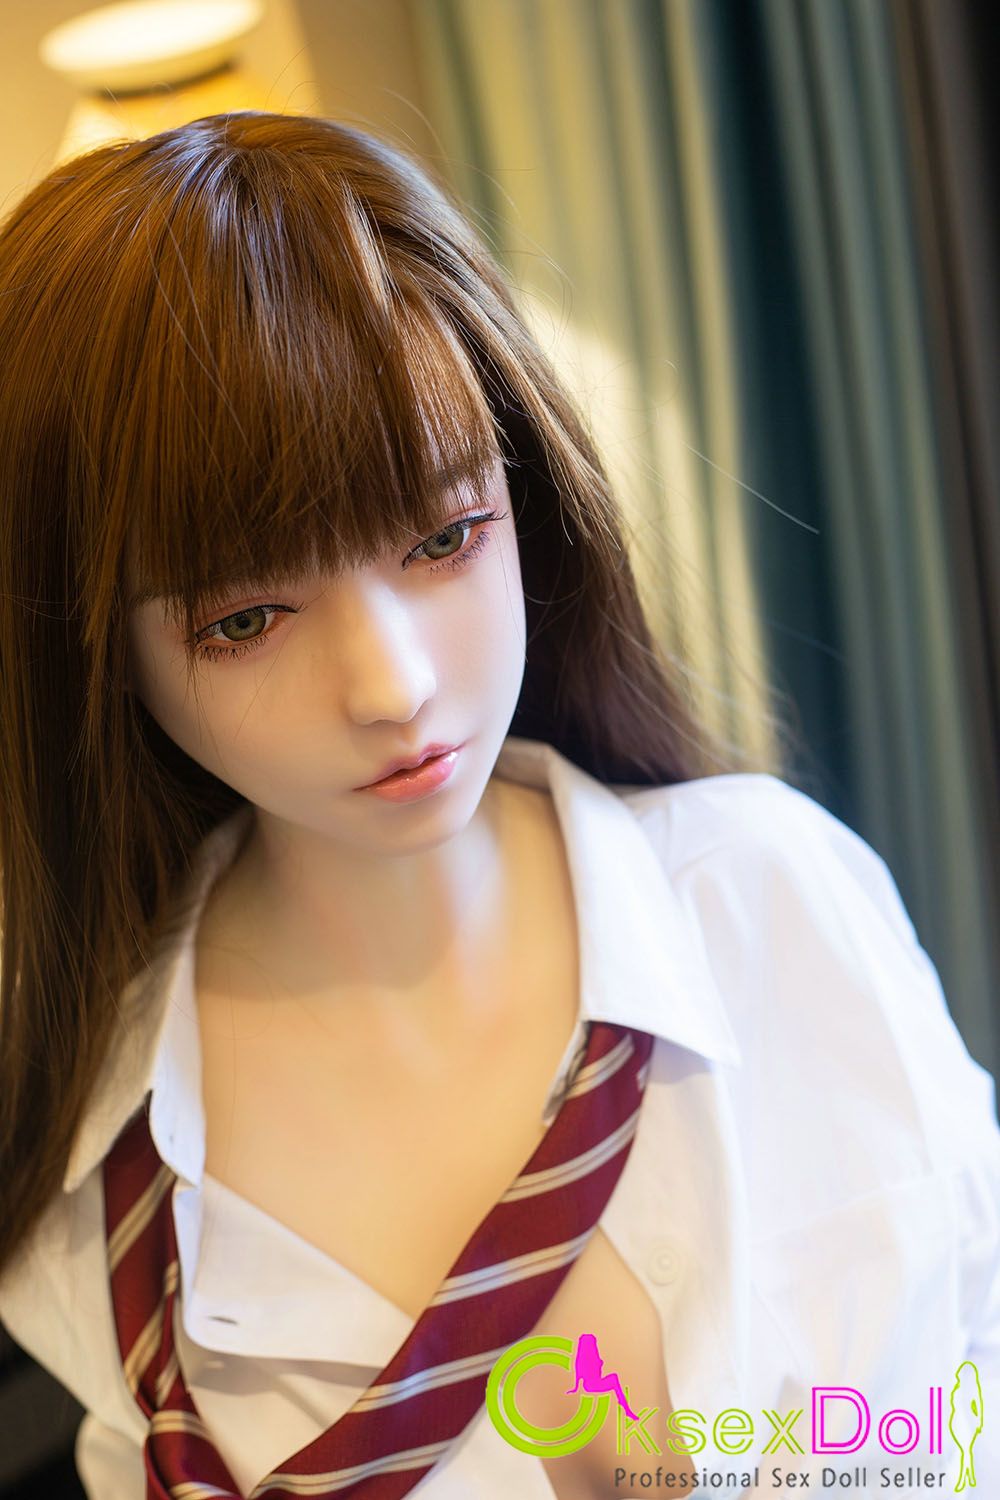 Liflike Young Sex Doll pic